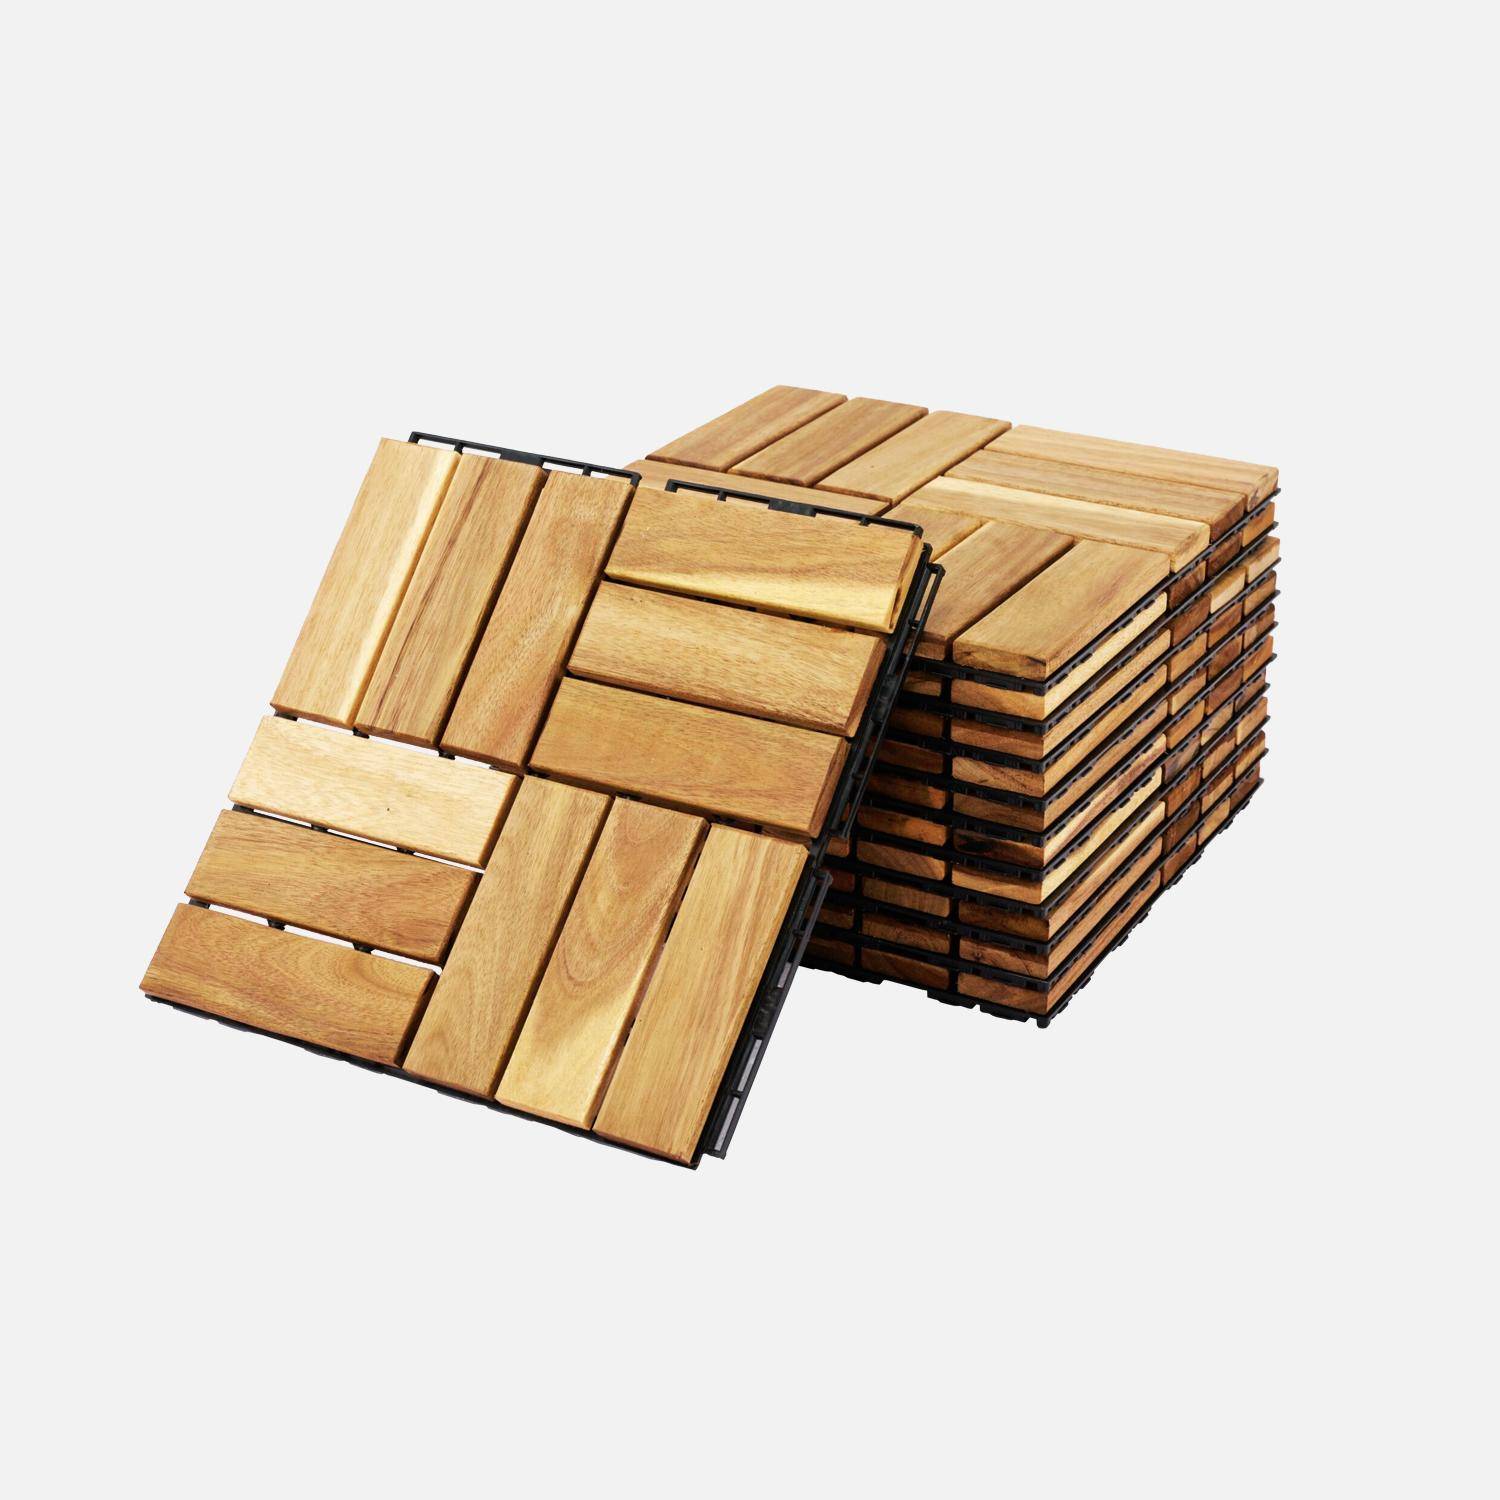 Pack of 10 acacia wood decking tiles 30x30cm, square pattern, clip-on,sweeek,Photo1